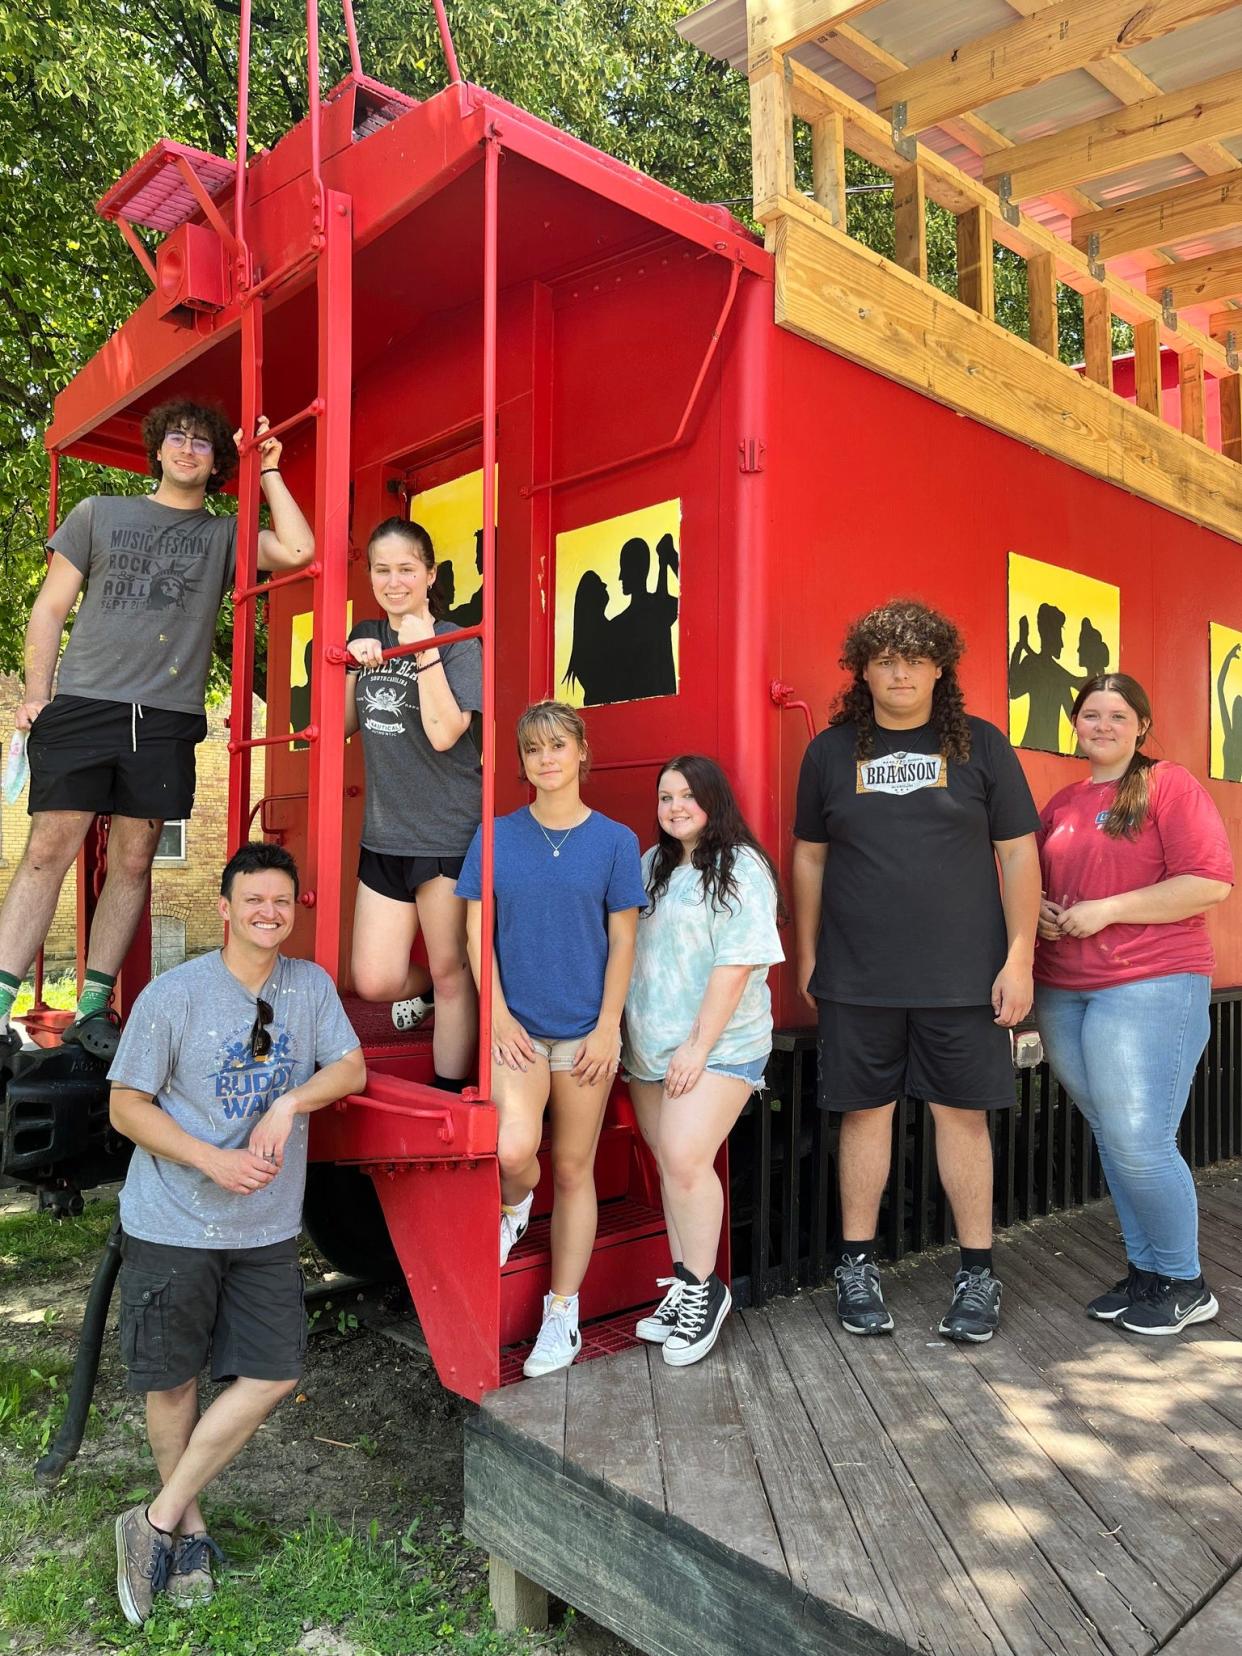 Students in Steve Cabassa's art classes at Alliance High School helped to paint the Downtown Alliance Caboose, giving the structure that's used as a stage for concerts a musically themed design. Cabassa is pictured standing on the grass at the bottom left, and the student artists pictured, from left, are Evan Winans, Eliza McDonald, Mia Pasco, Ally Sherwood, Garrett Adkins and Madyson Kline.